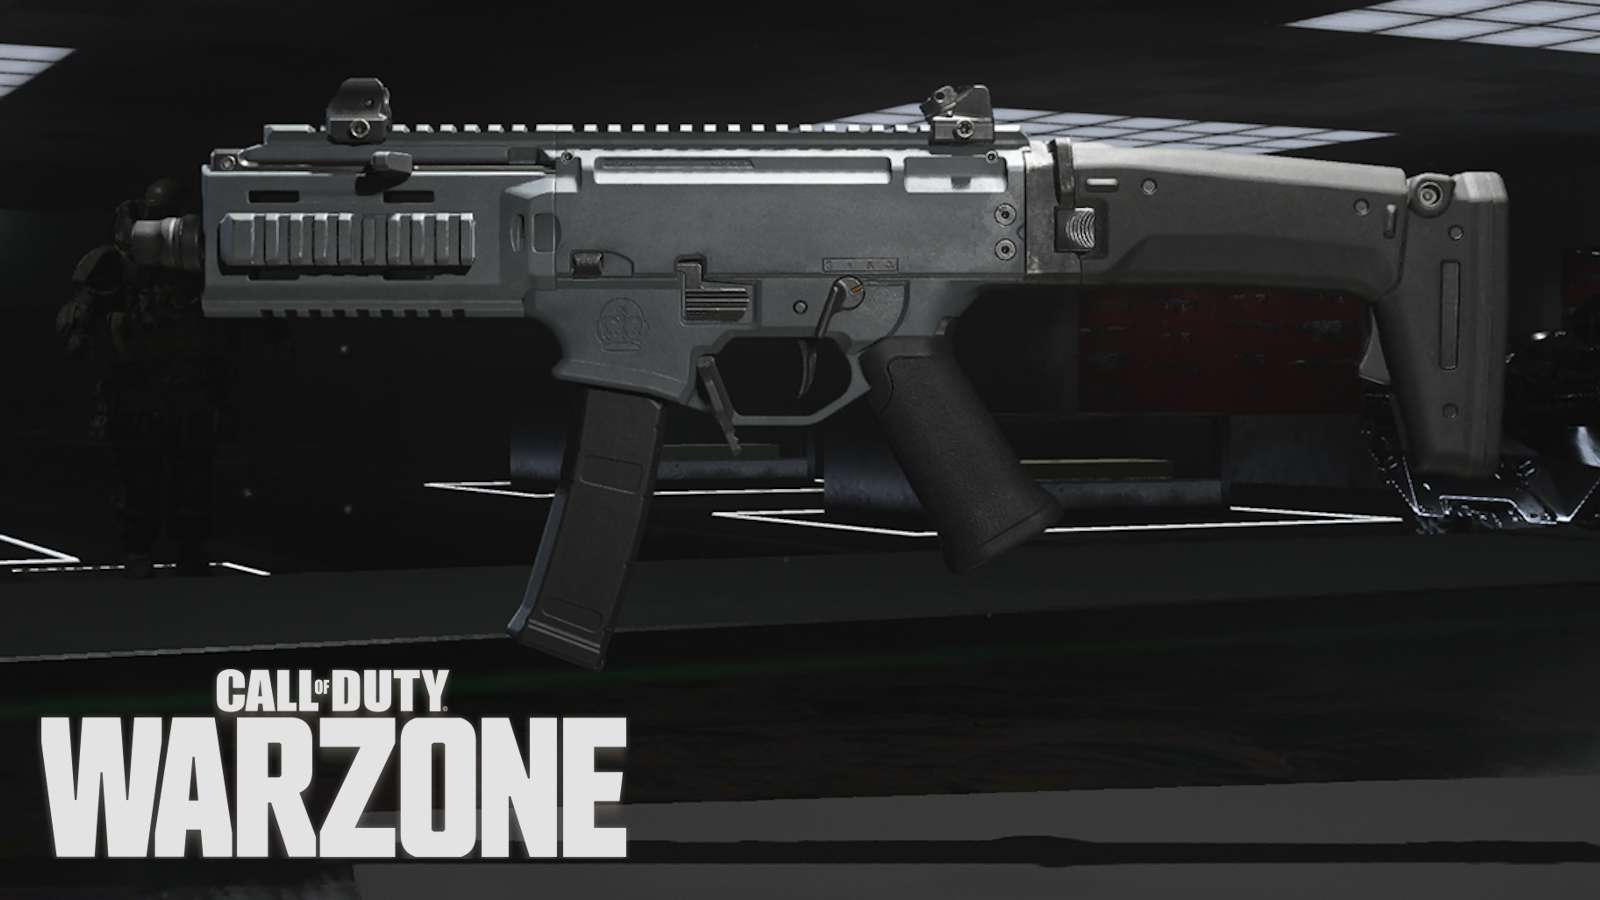 Rival-9 SMG with Call of Duty: Warzone logo.